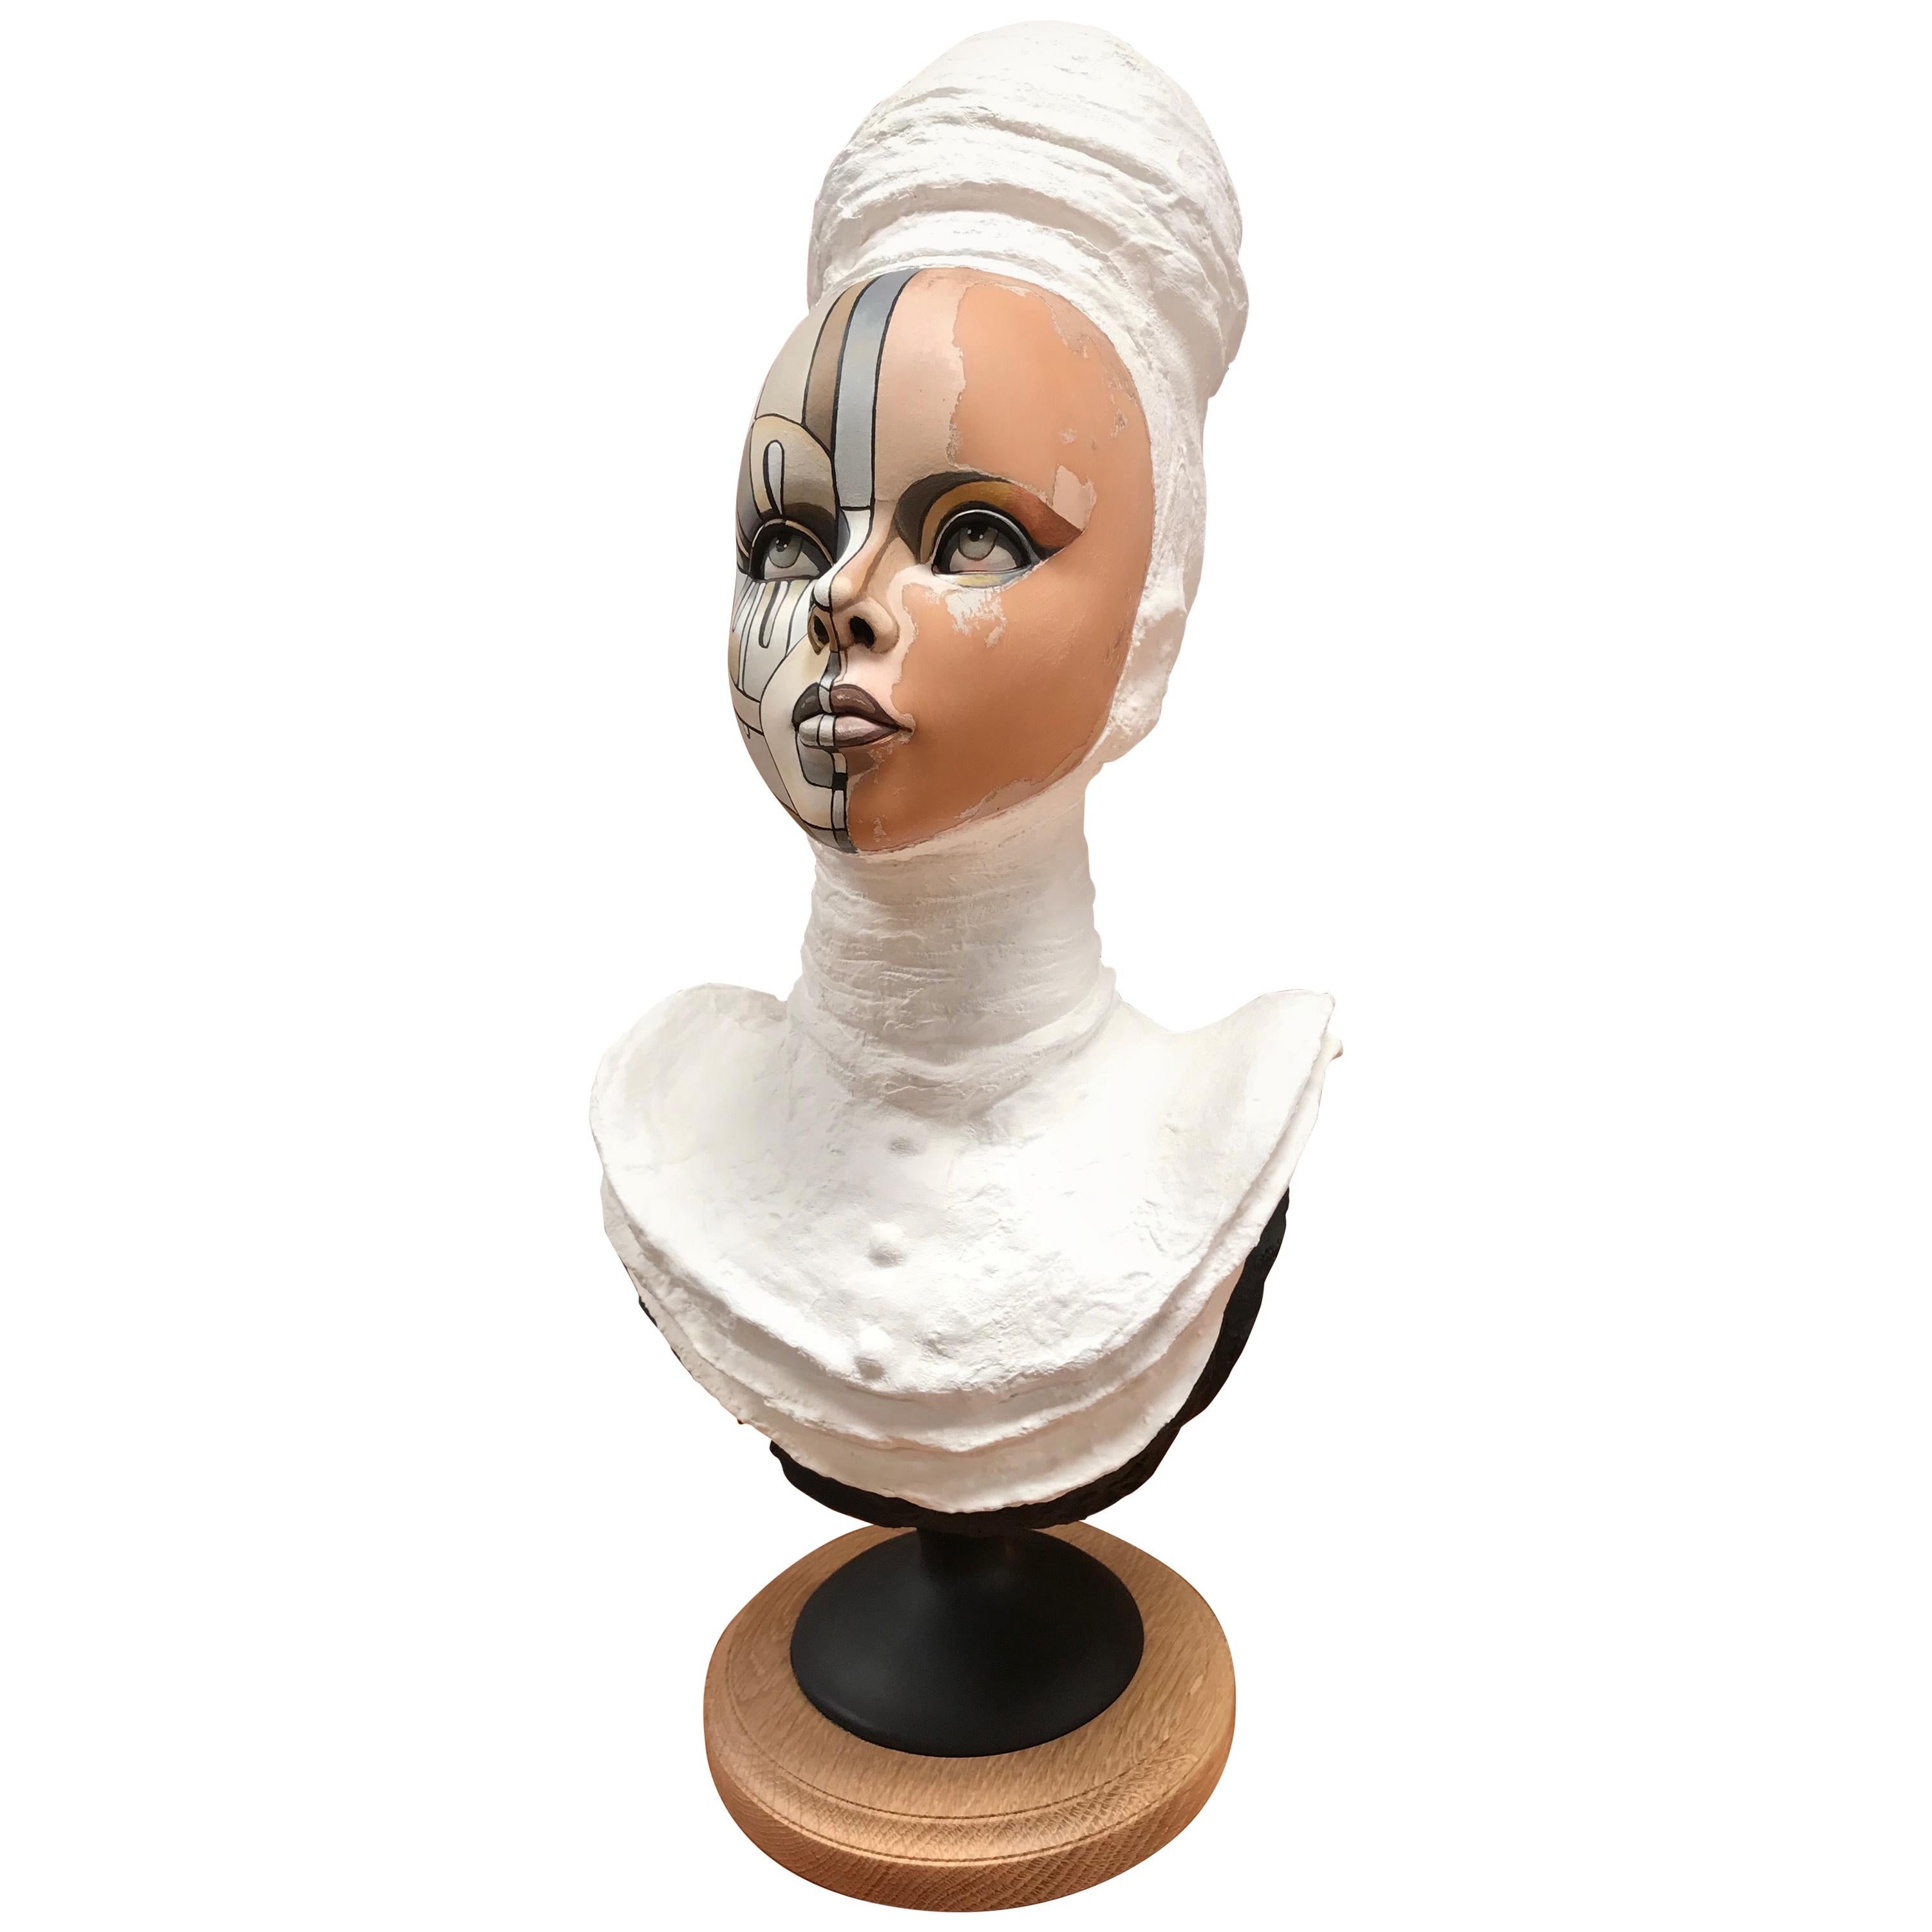 Vintage Bust of a Young Women, Signed David Gilmore, USA, 2019